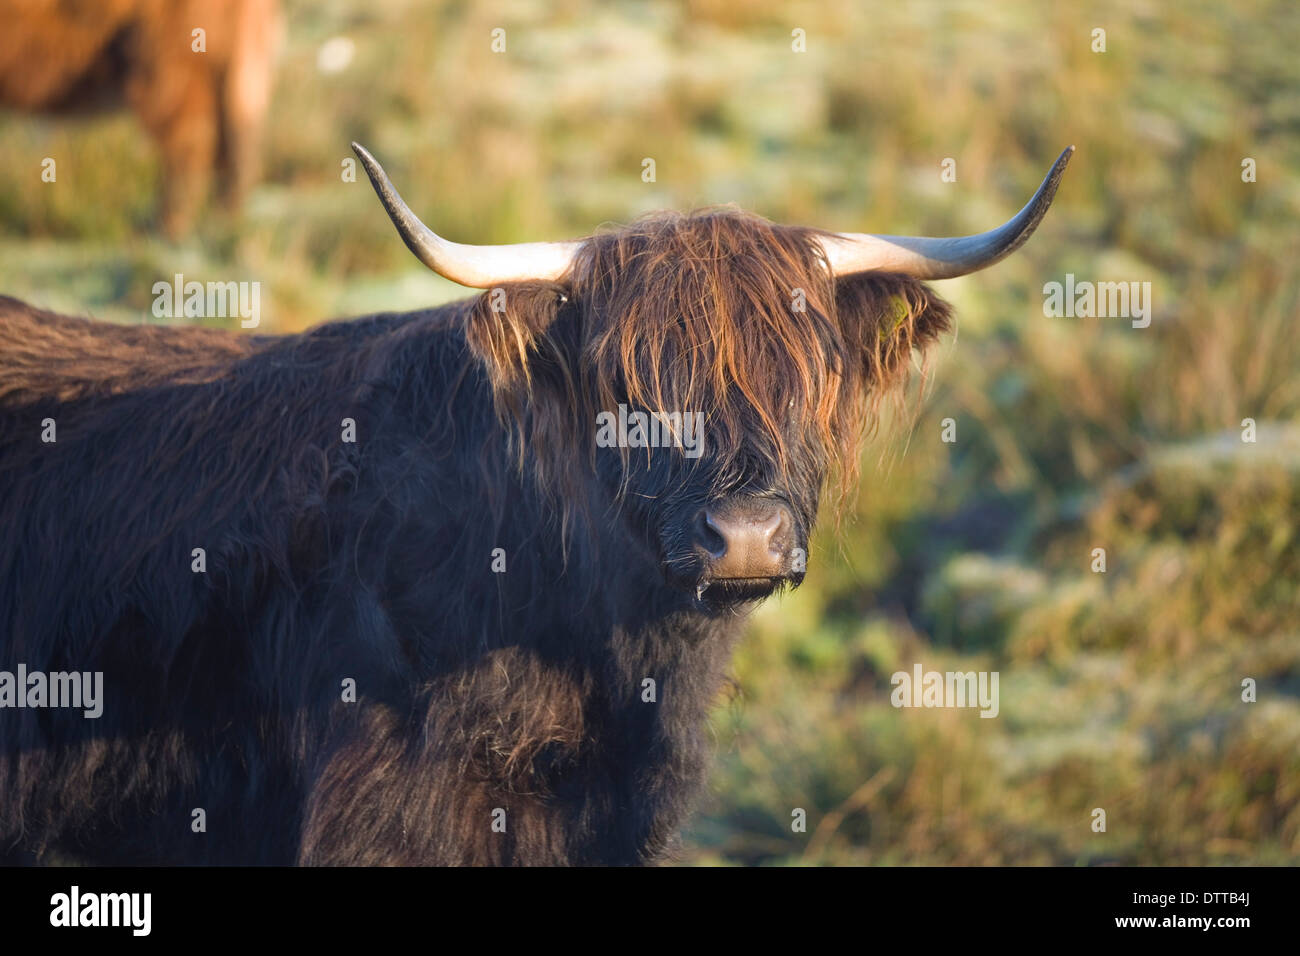 LARGE BLACK HIGHLAND COW by LIVING NATURE